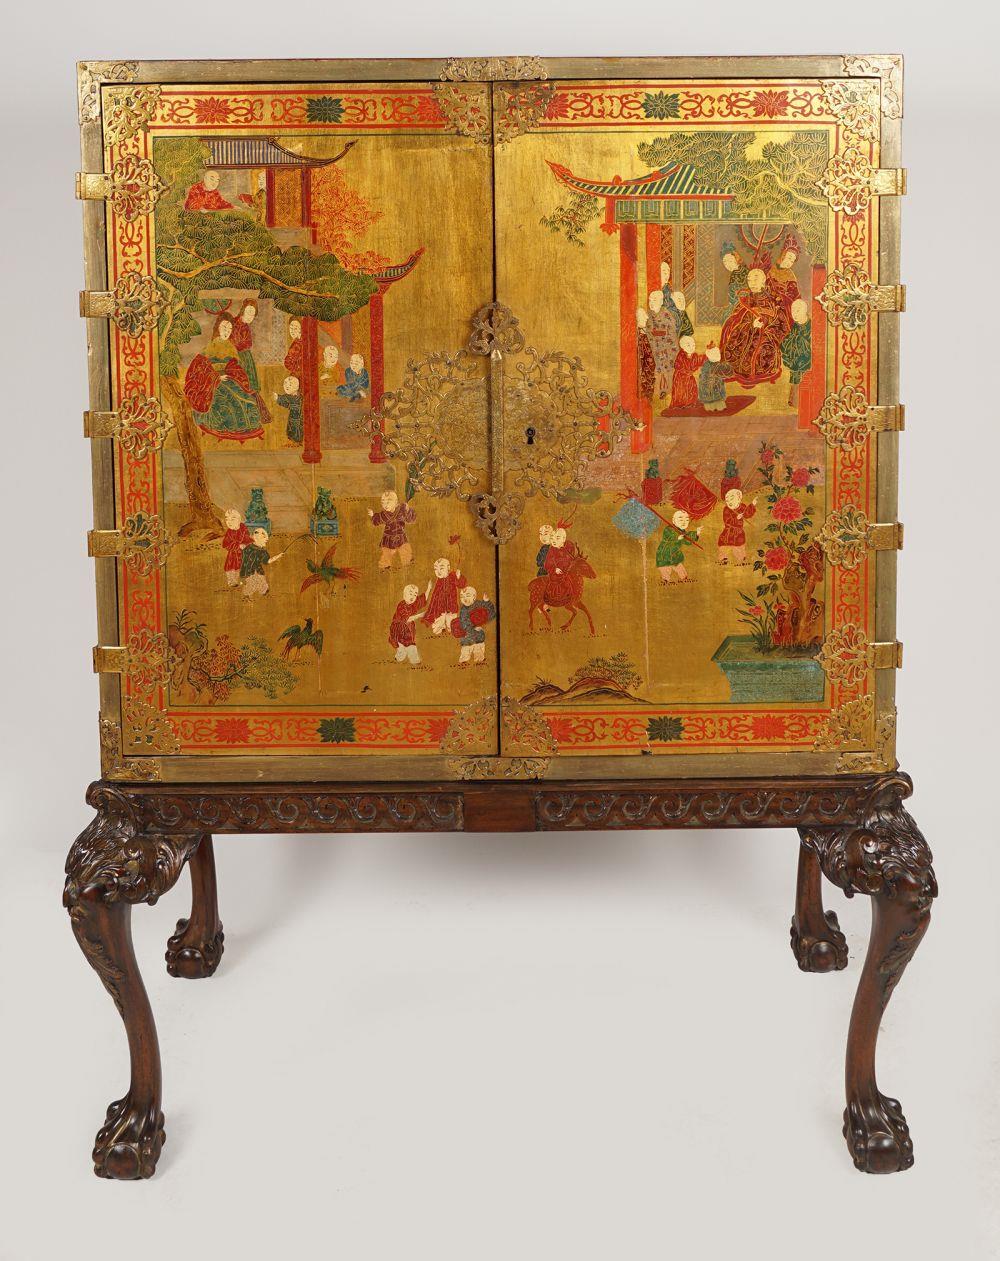 18TH-CENTURY CHINESE LACQUERED CABINET